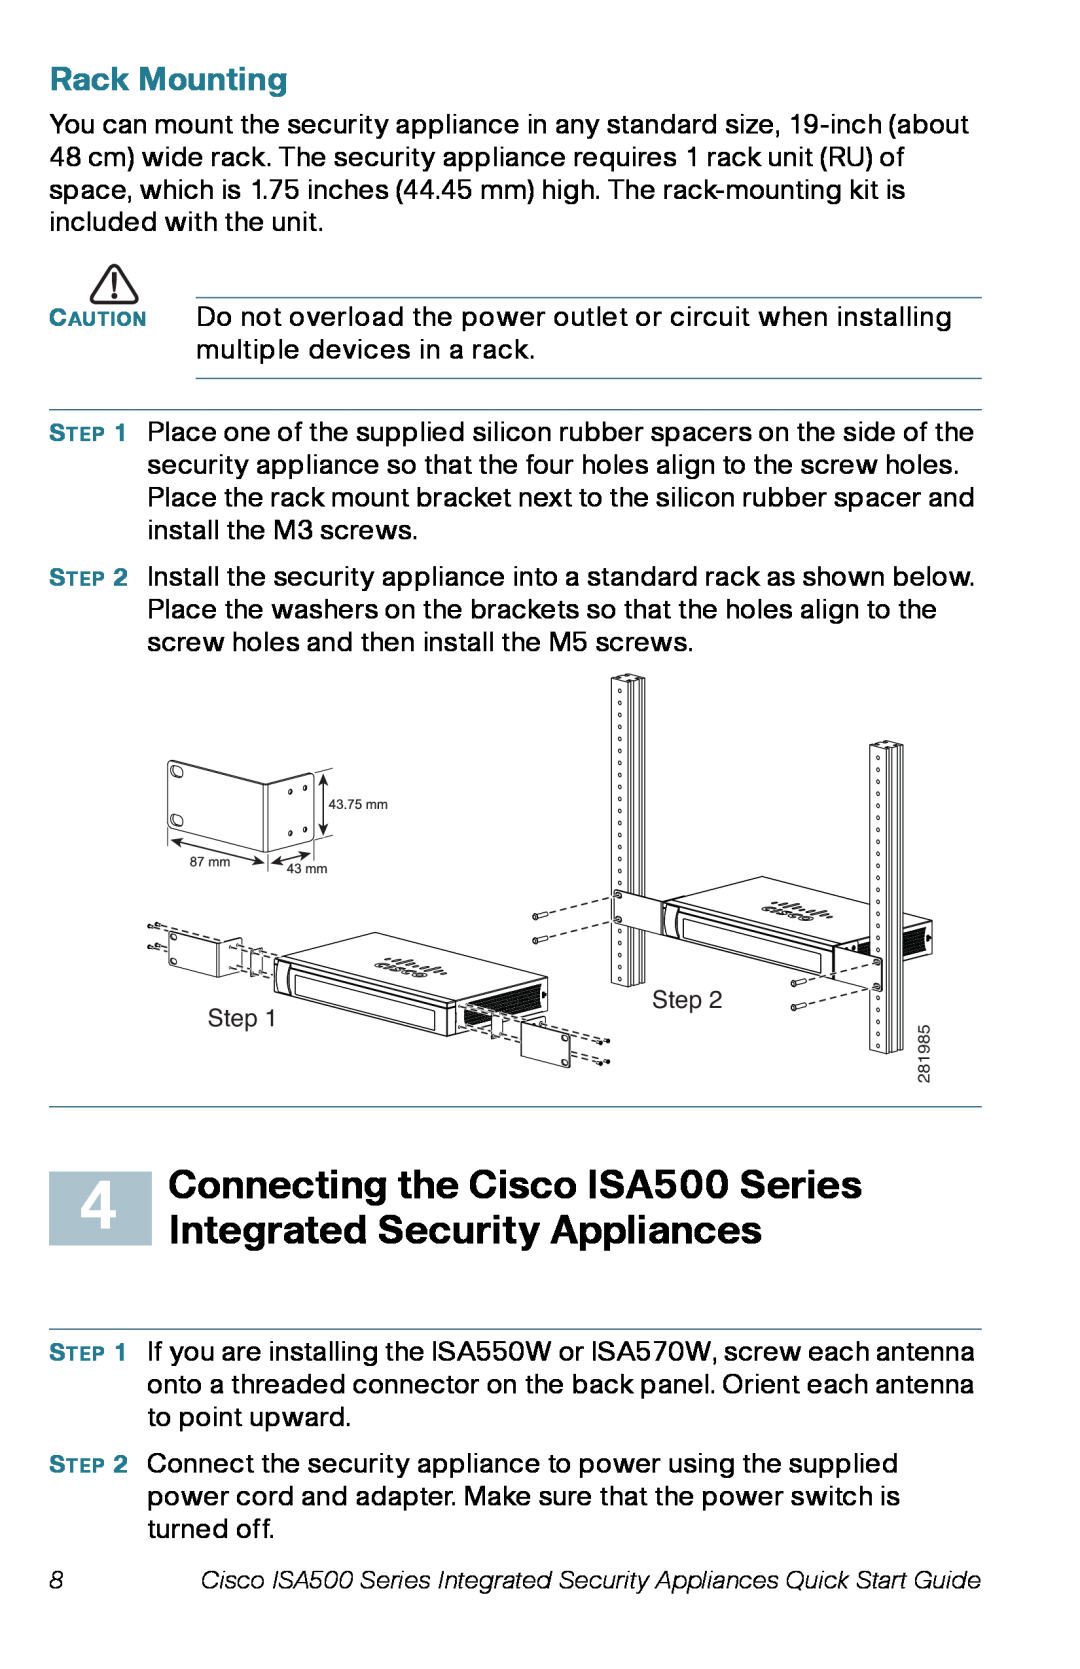 Cisco Systems ISA550W Connecting the Cisco ISA500 Series, Rack Mounting, Integrated Security Appliances, Step Step 